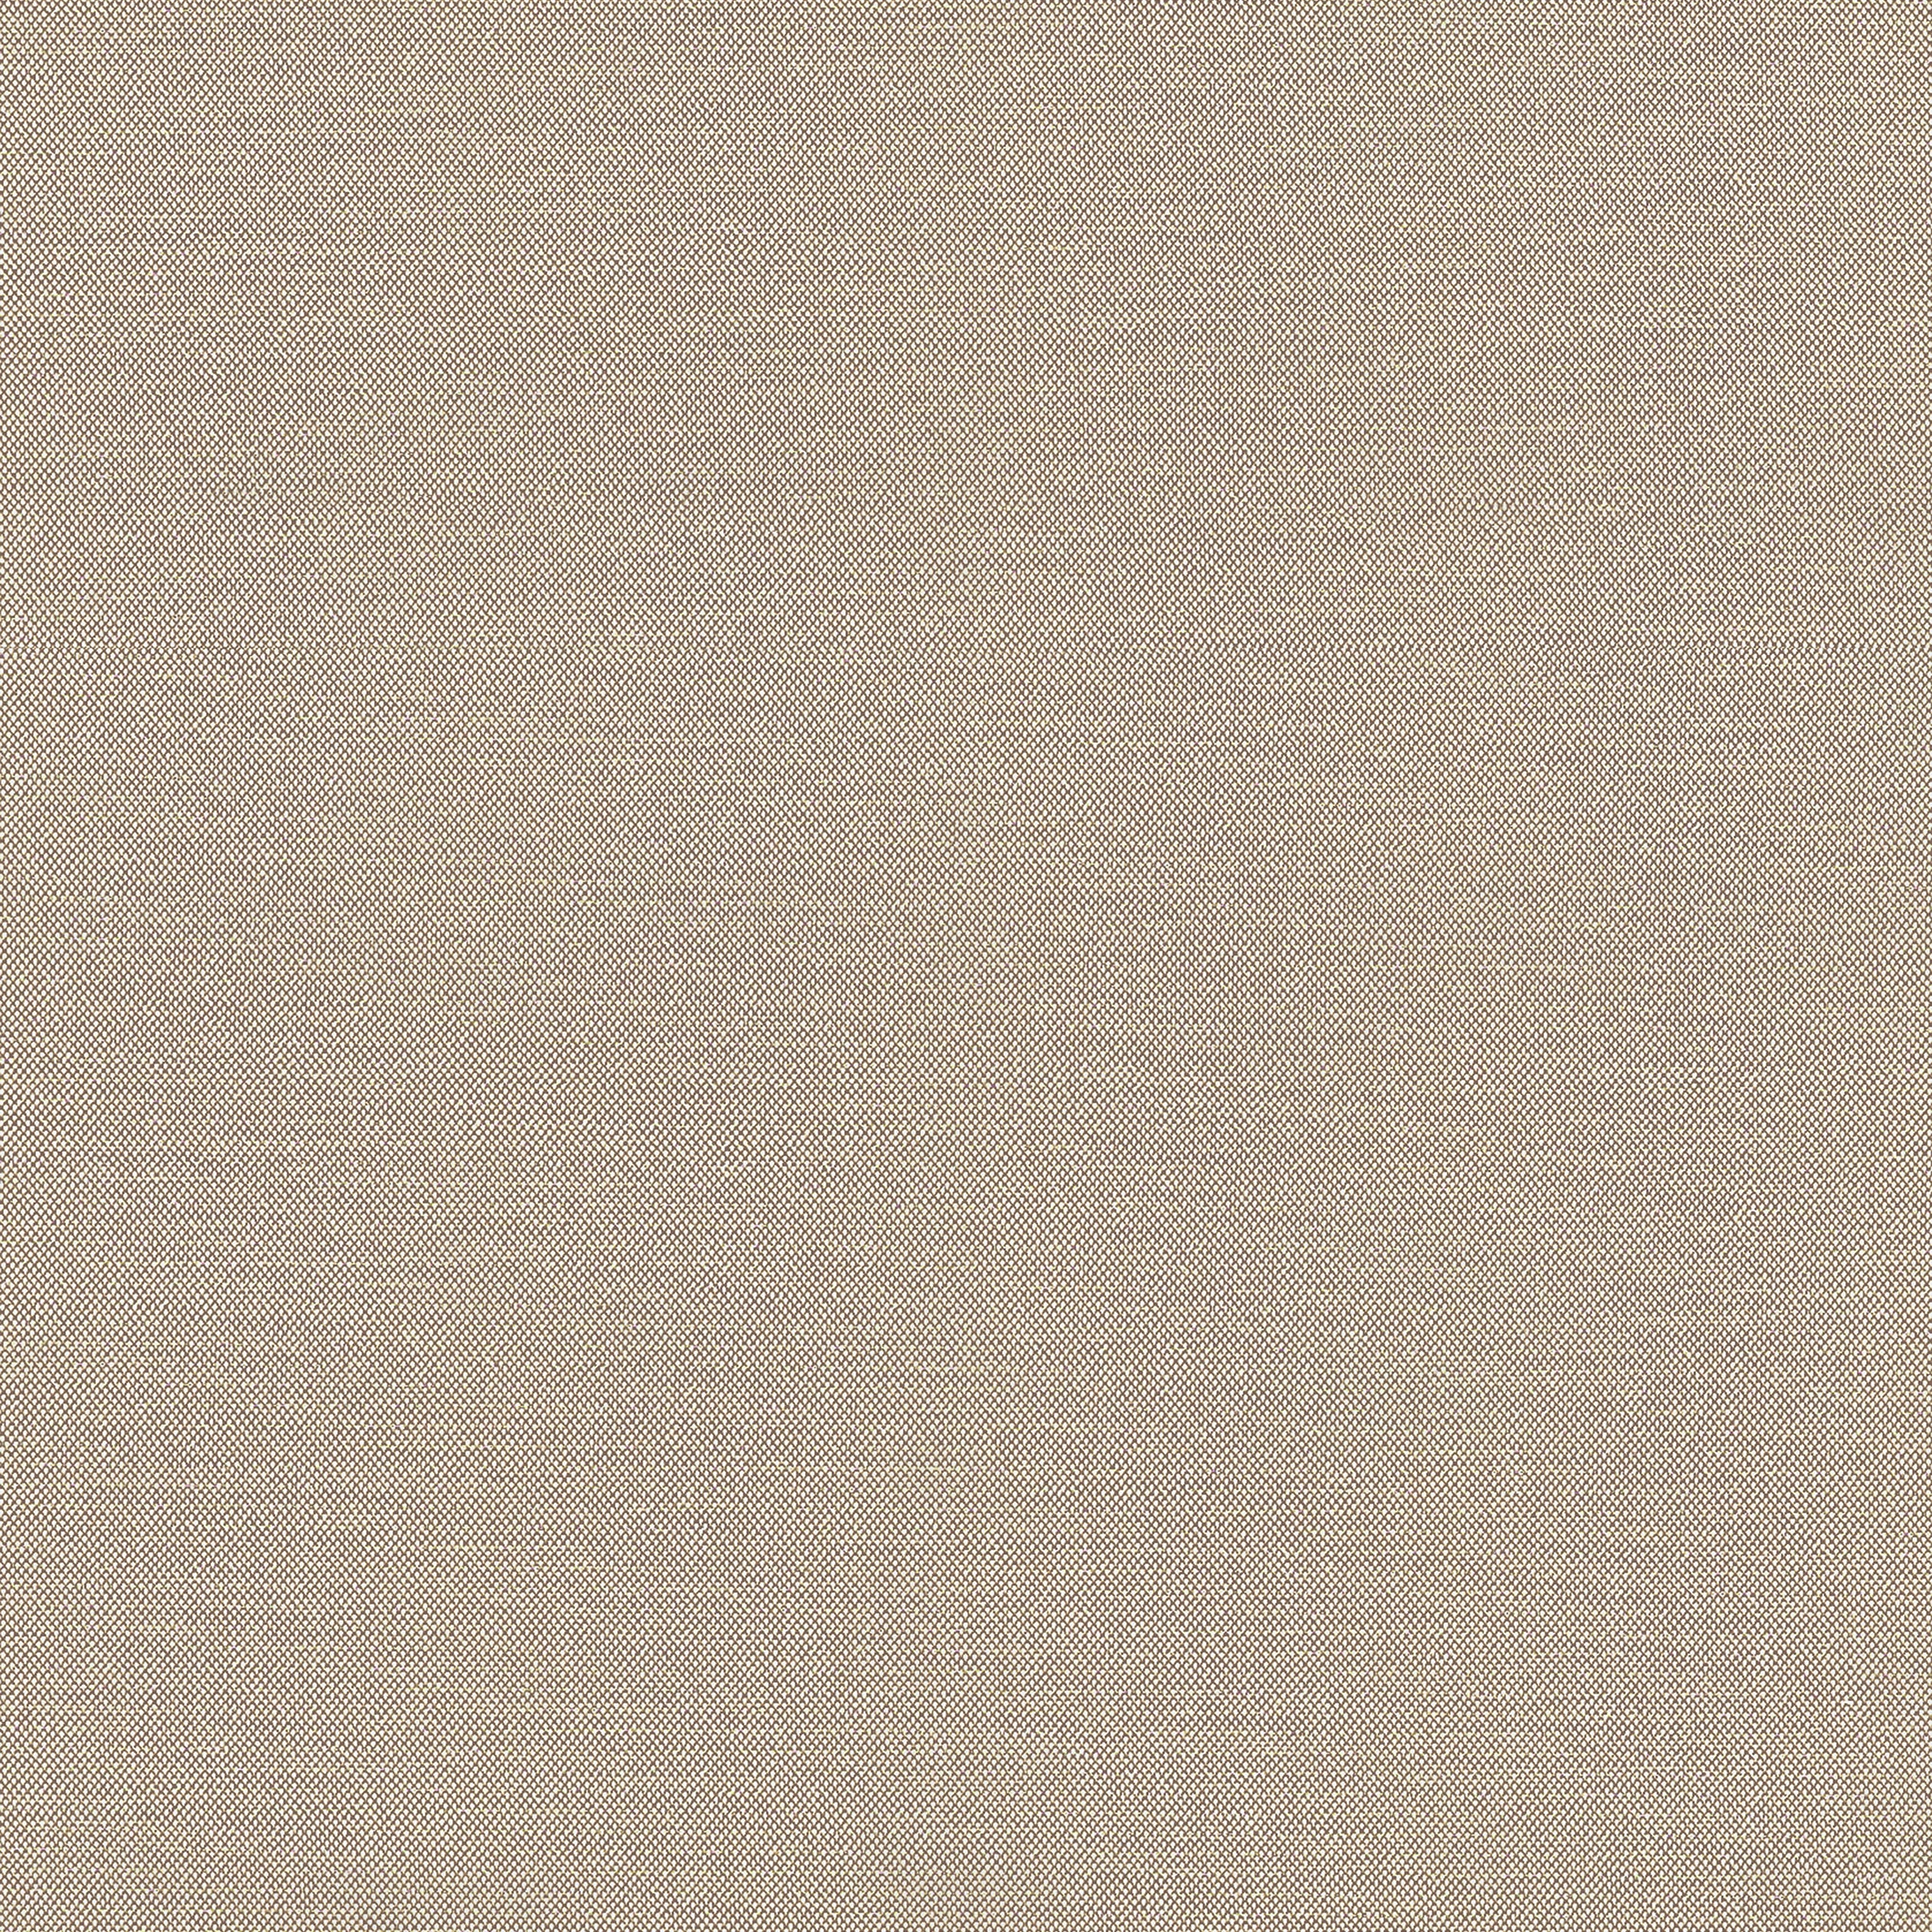 Tessa fabric in jute color - pattern number W81652 - by Thibaut in the Locale collection